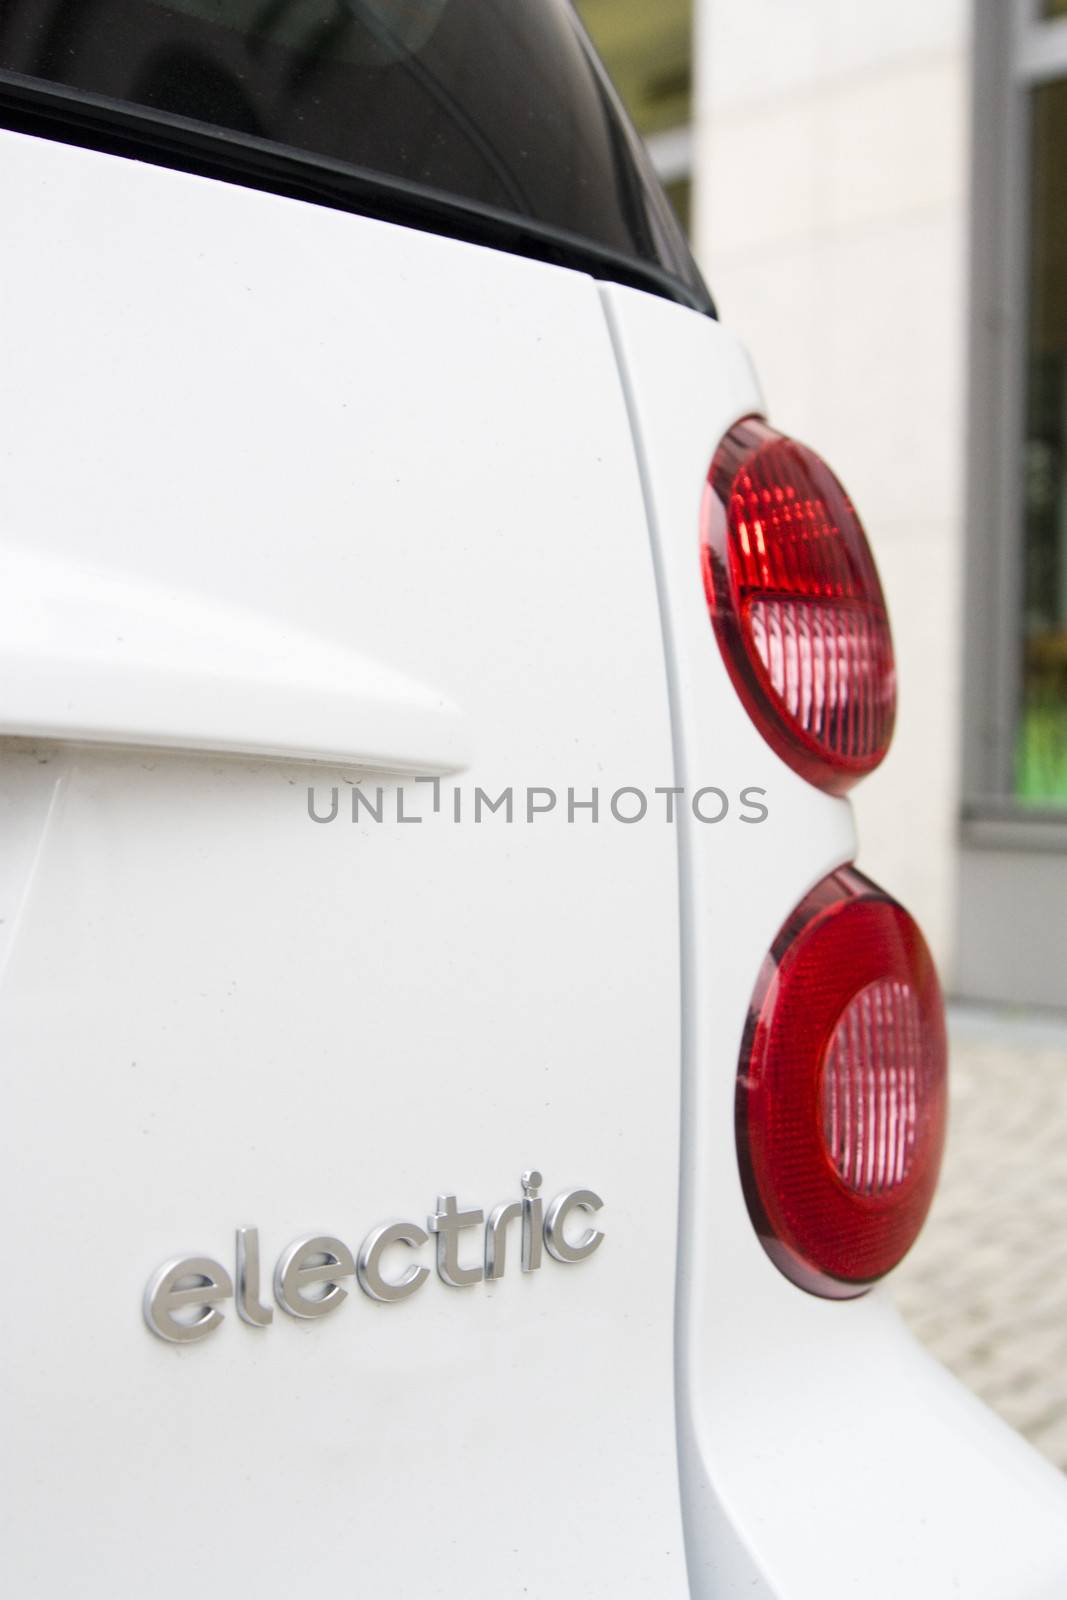 Back of an eletric car by Caracarafoto